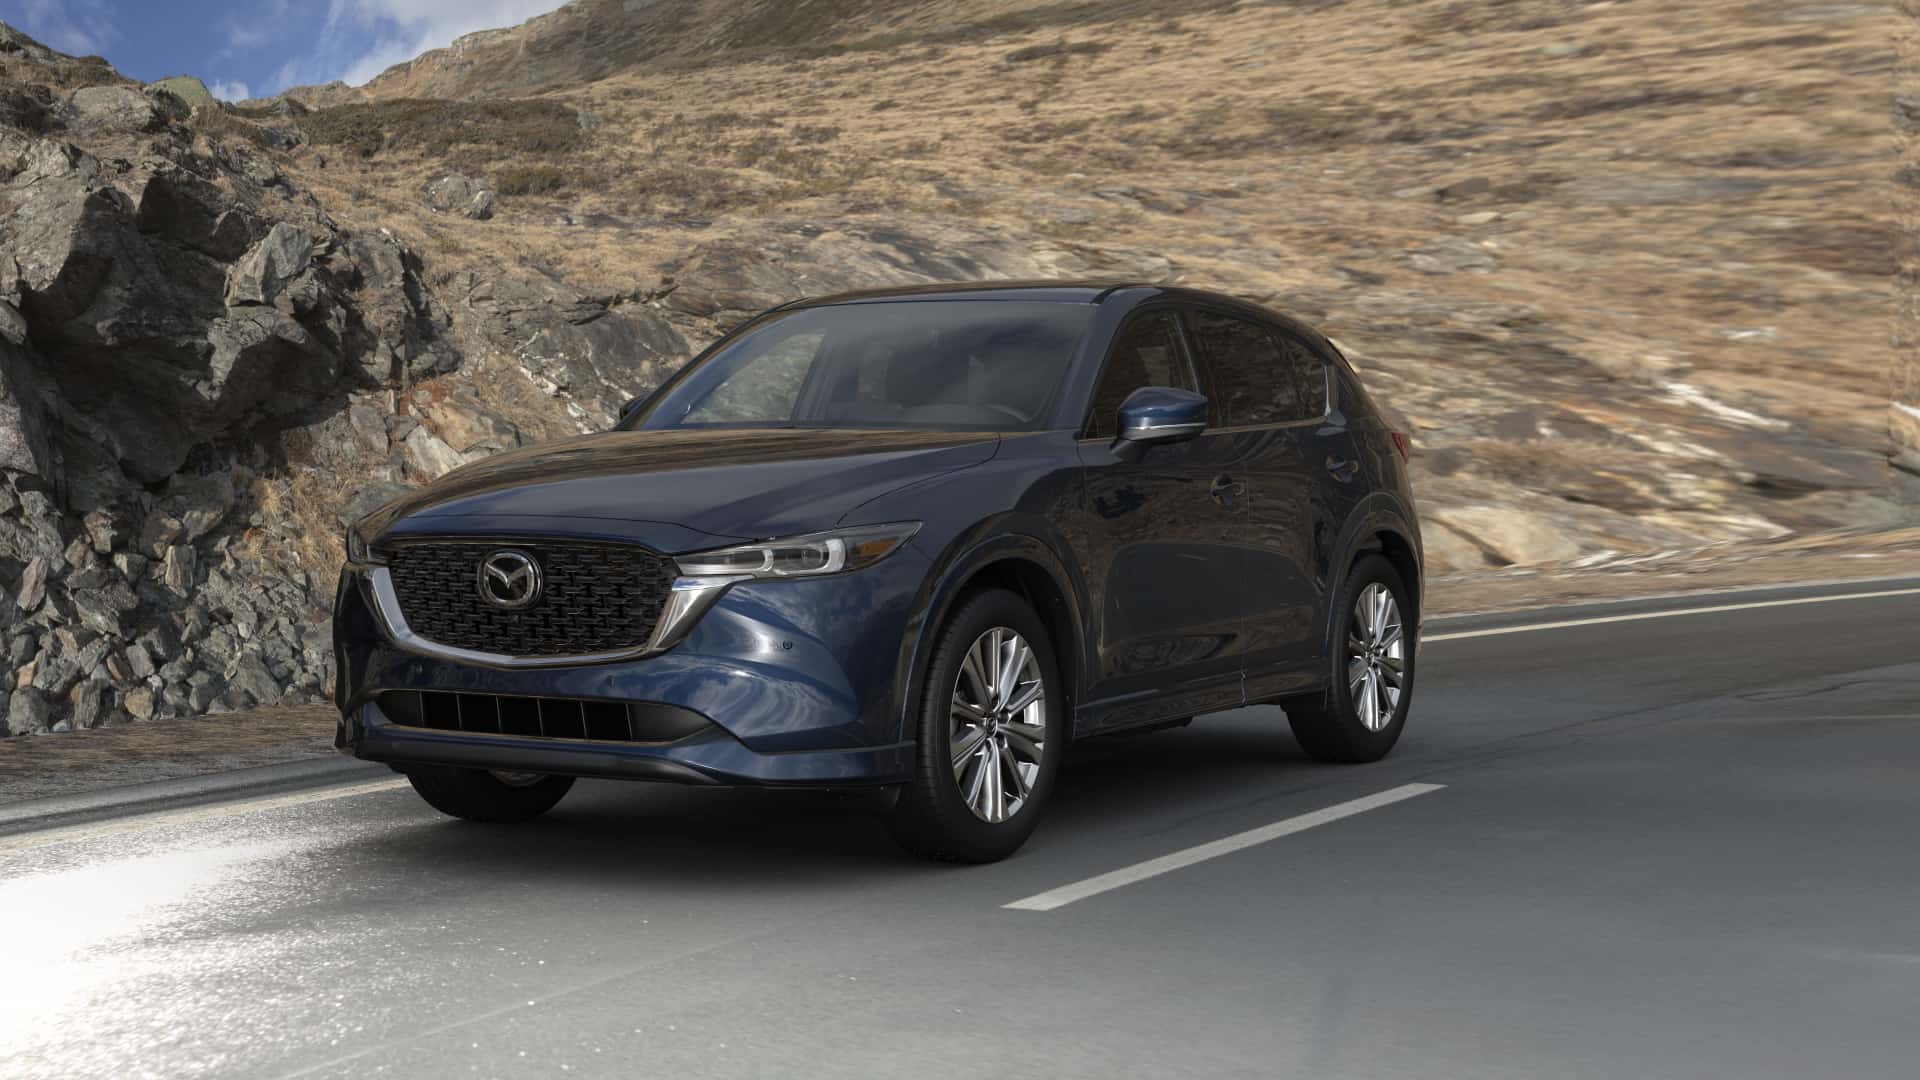 2023 Mazda CX-5 2.5 Turbo Signature Deep Crystal Blue Mica| Mazda of South Charlotte in Pineville NC